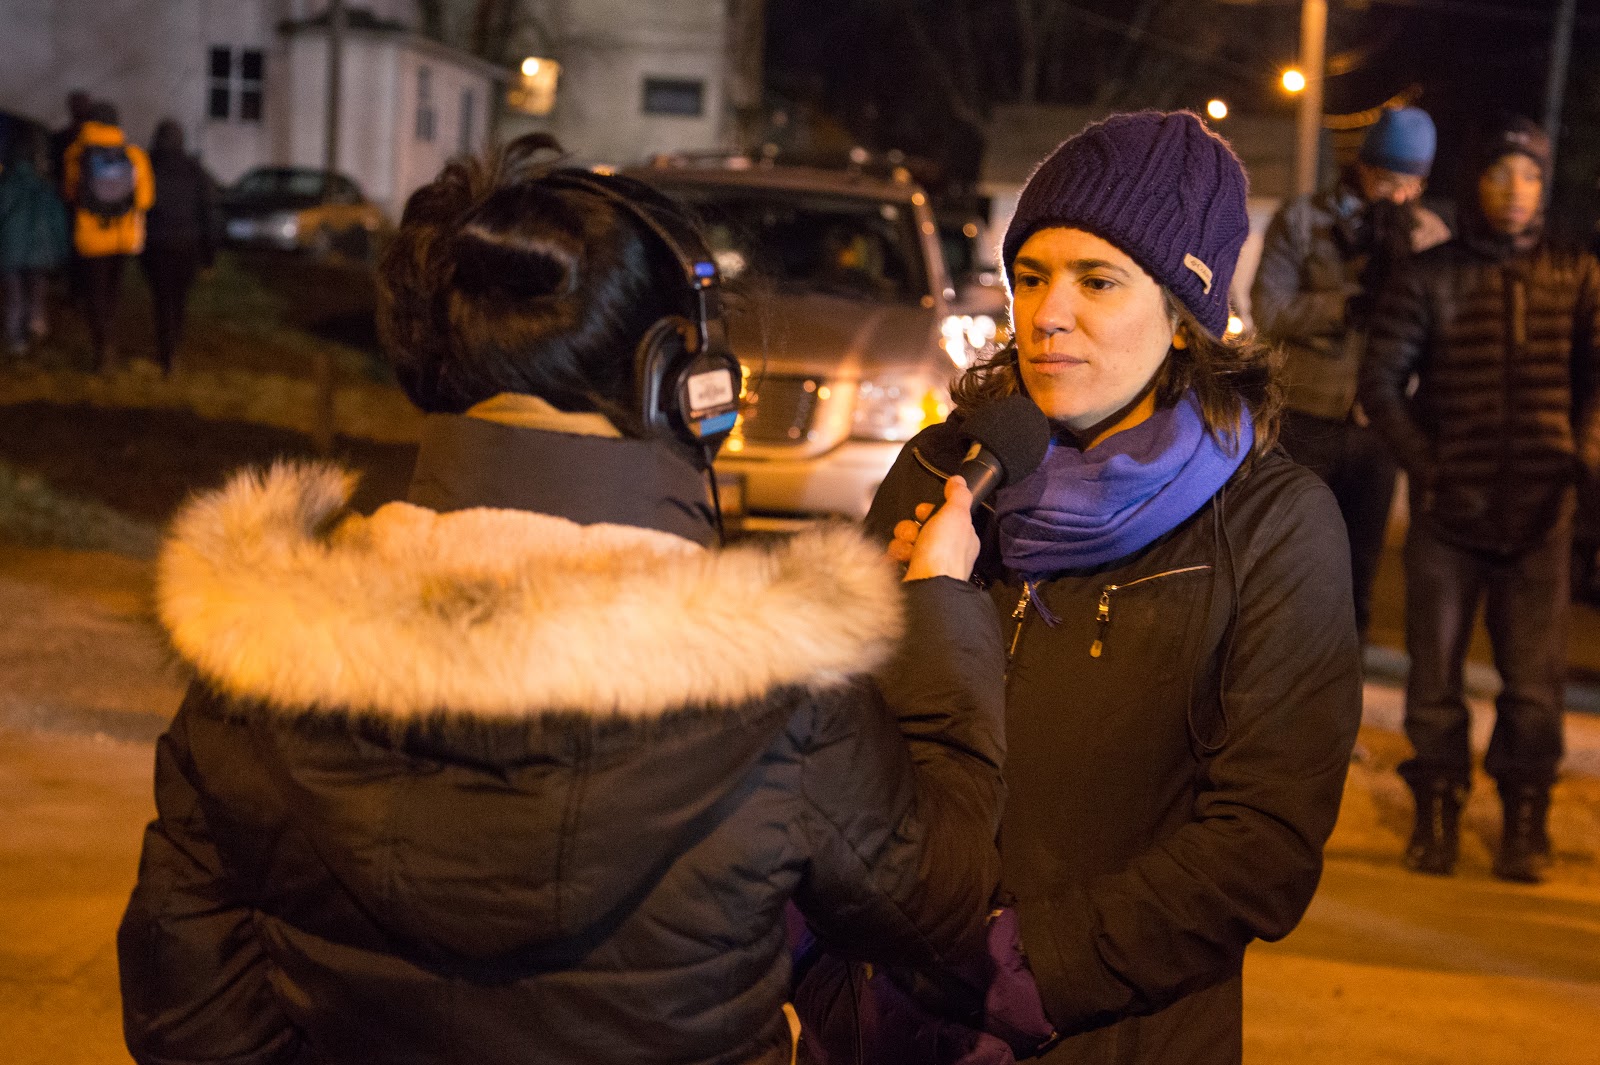 Minneapolis City Council President, Lisa Bender, being interviewed outside of the 4th Precinct during the 2015 Precinct takeover after the killing of Jamar Clark